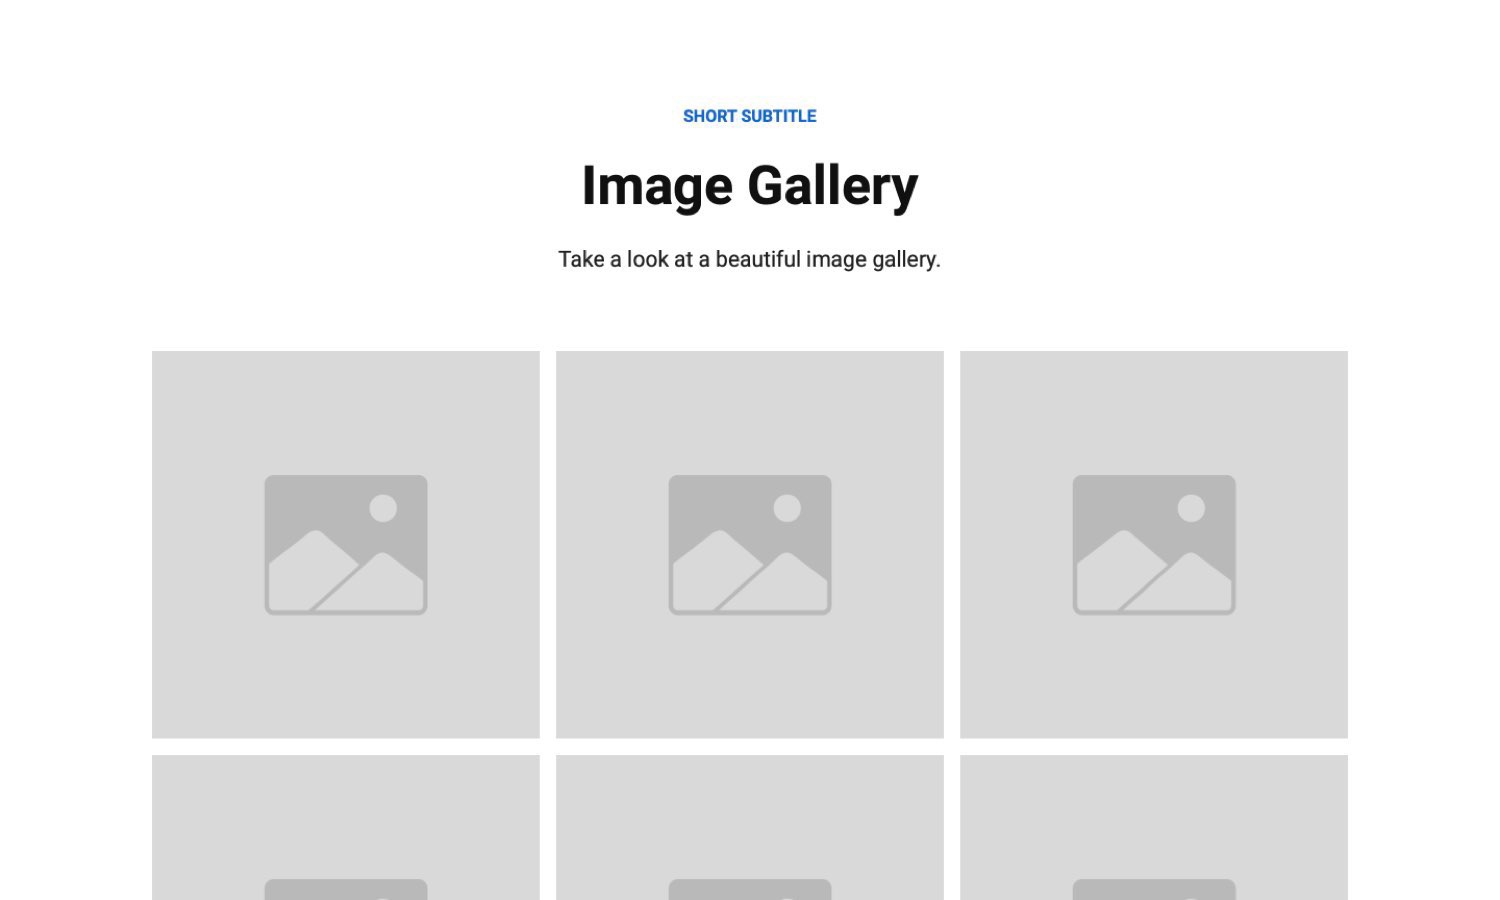 image gallery design section